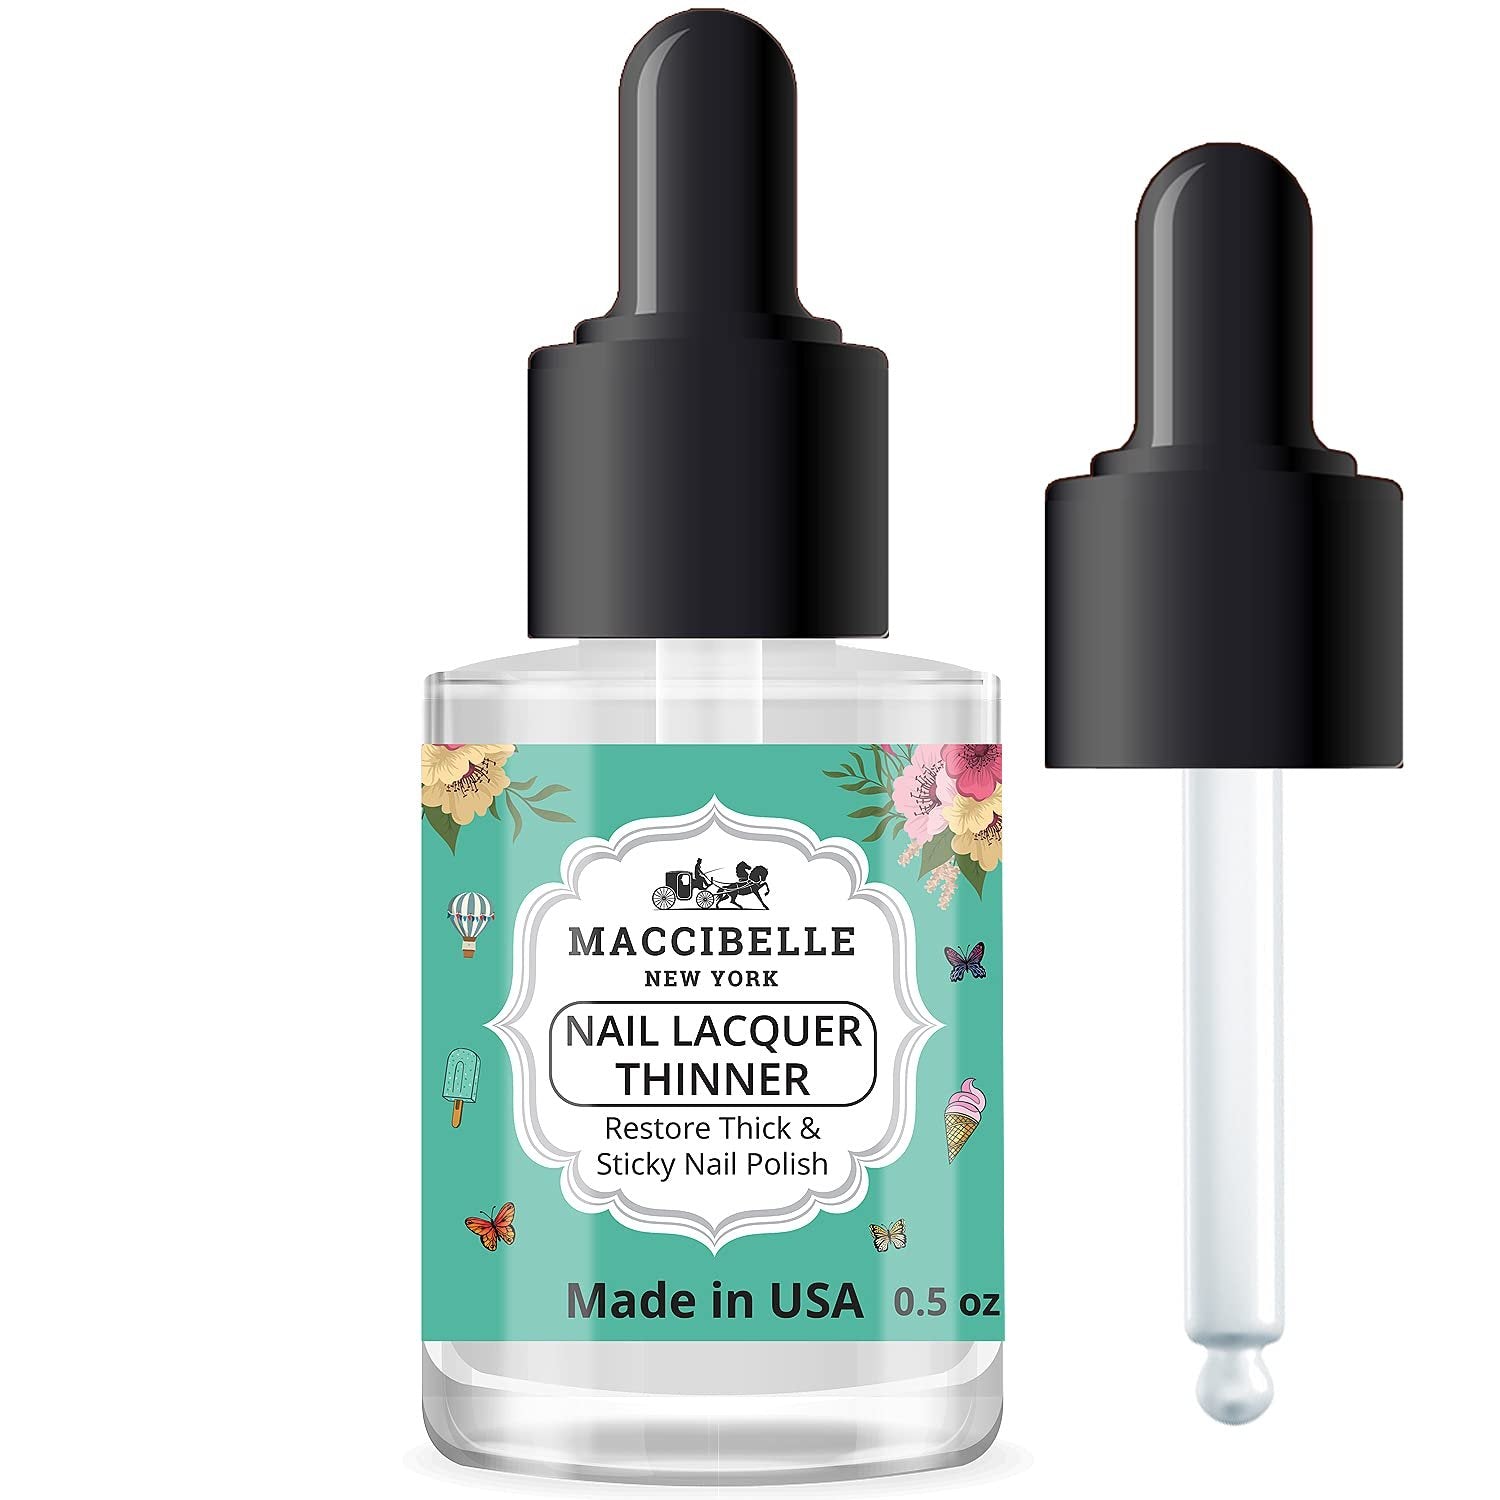 Maccibelle Nail Lacquer Thinner 0.5 oz - Thin and restore thick and goopy nail polish